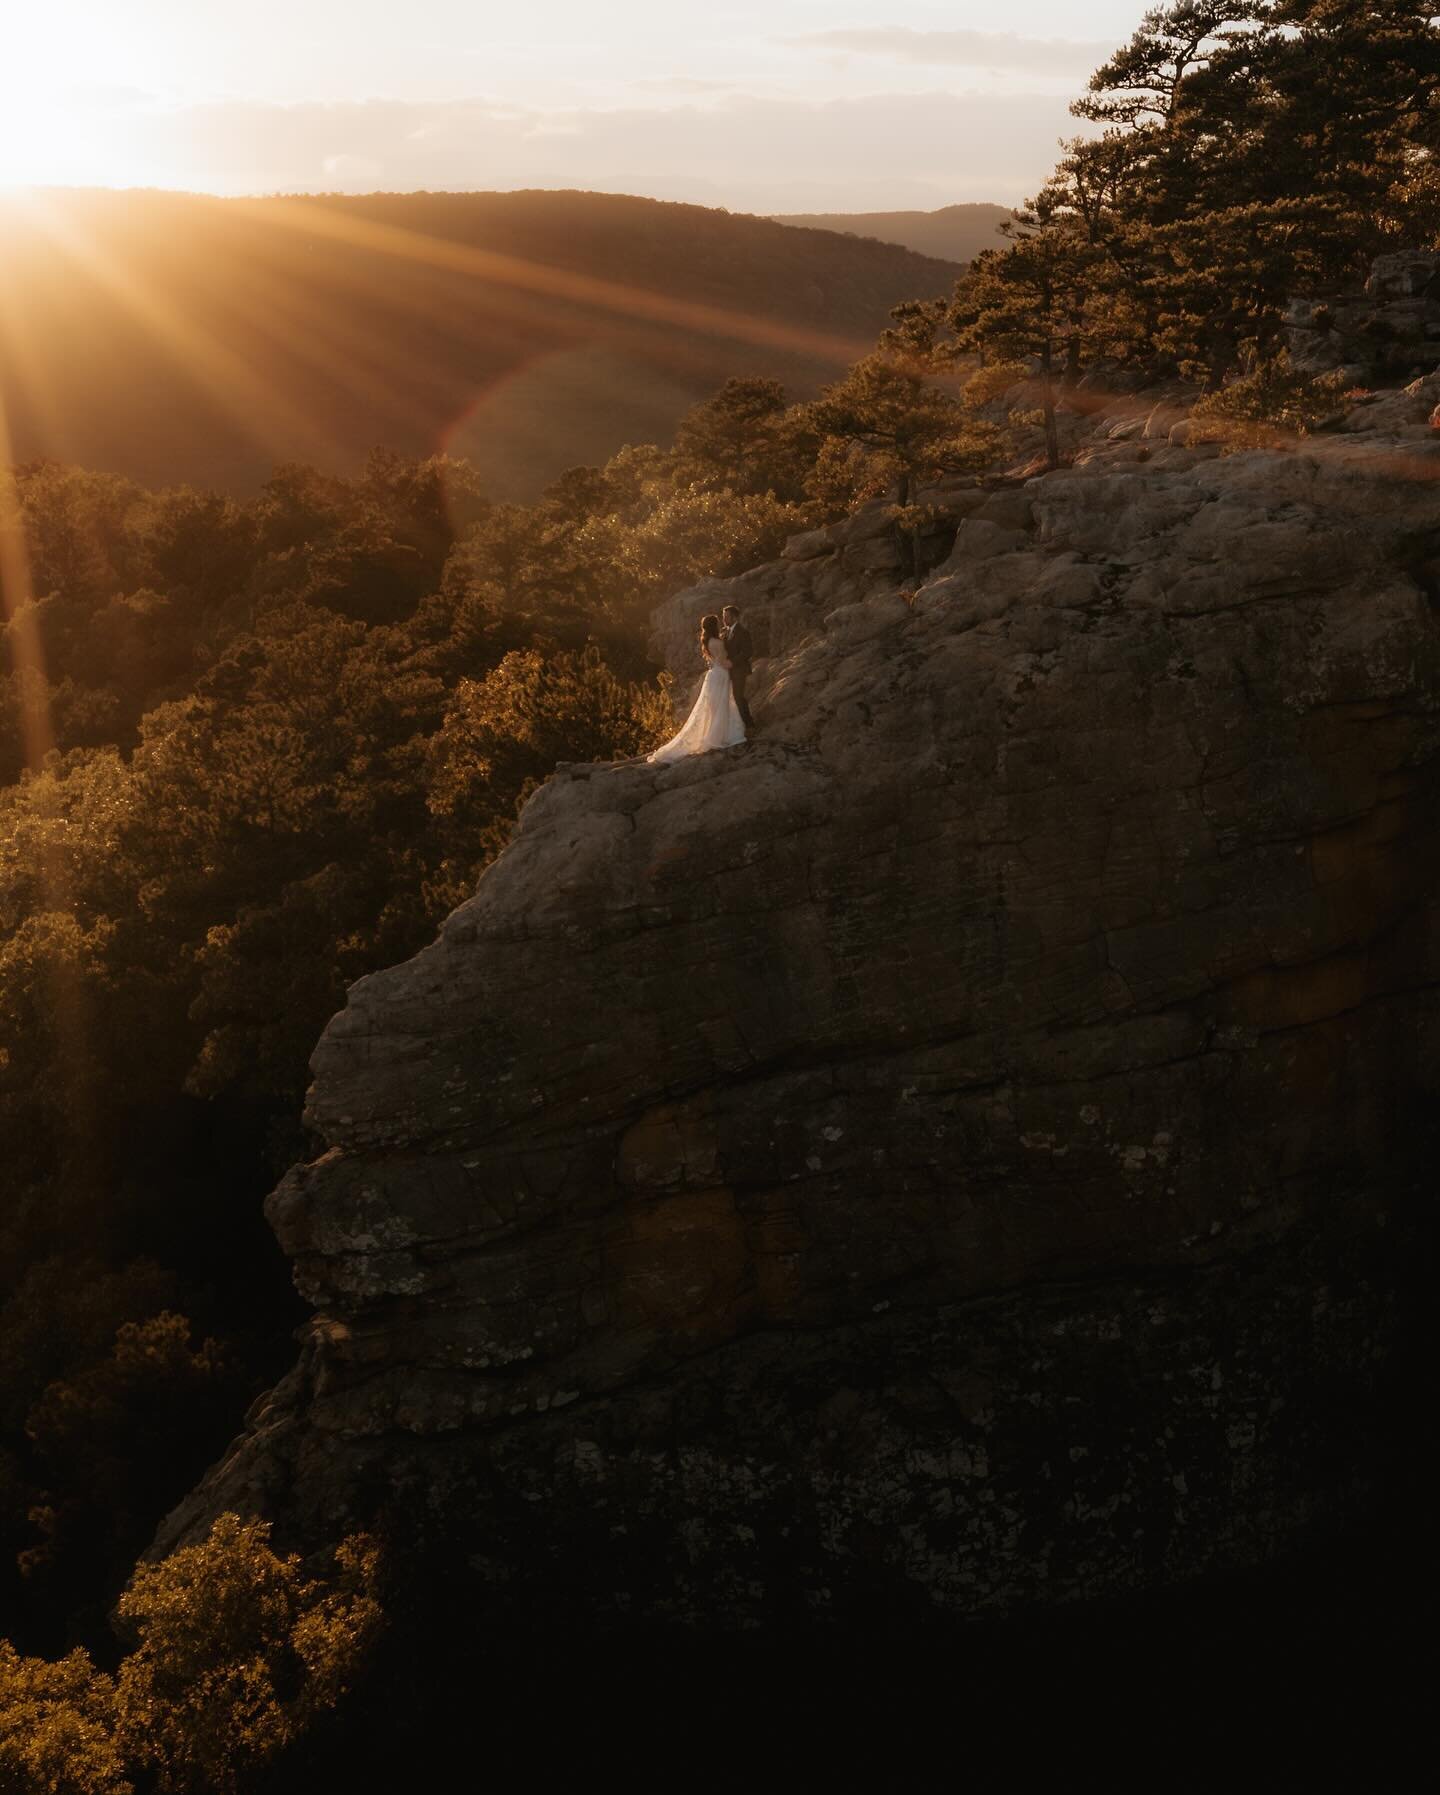 You are stellar. I will hold you close if you&rsquo;re afraid of heights. I need you to see this place. // Brandon Boyd

#sunset #wedding #elopement #love #couplegoals #chasinglight #nikon